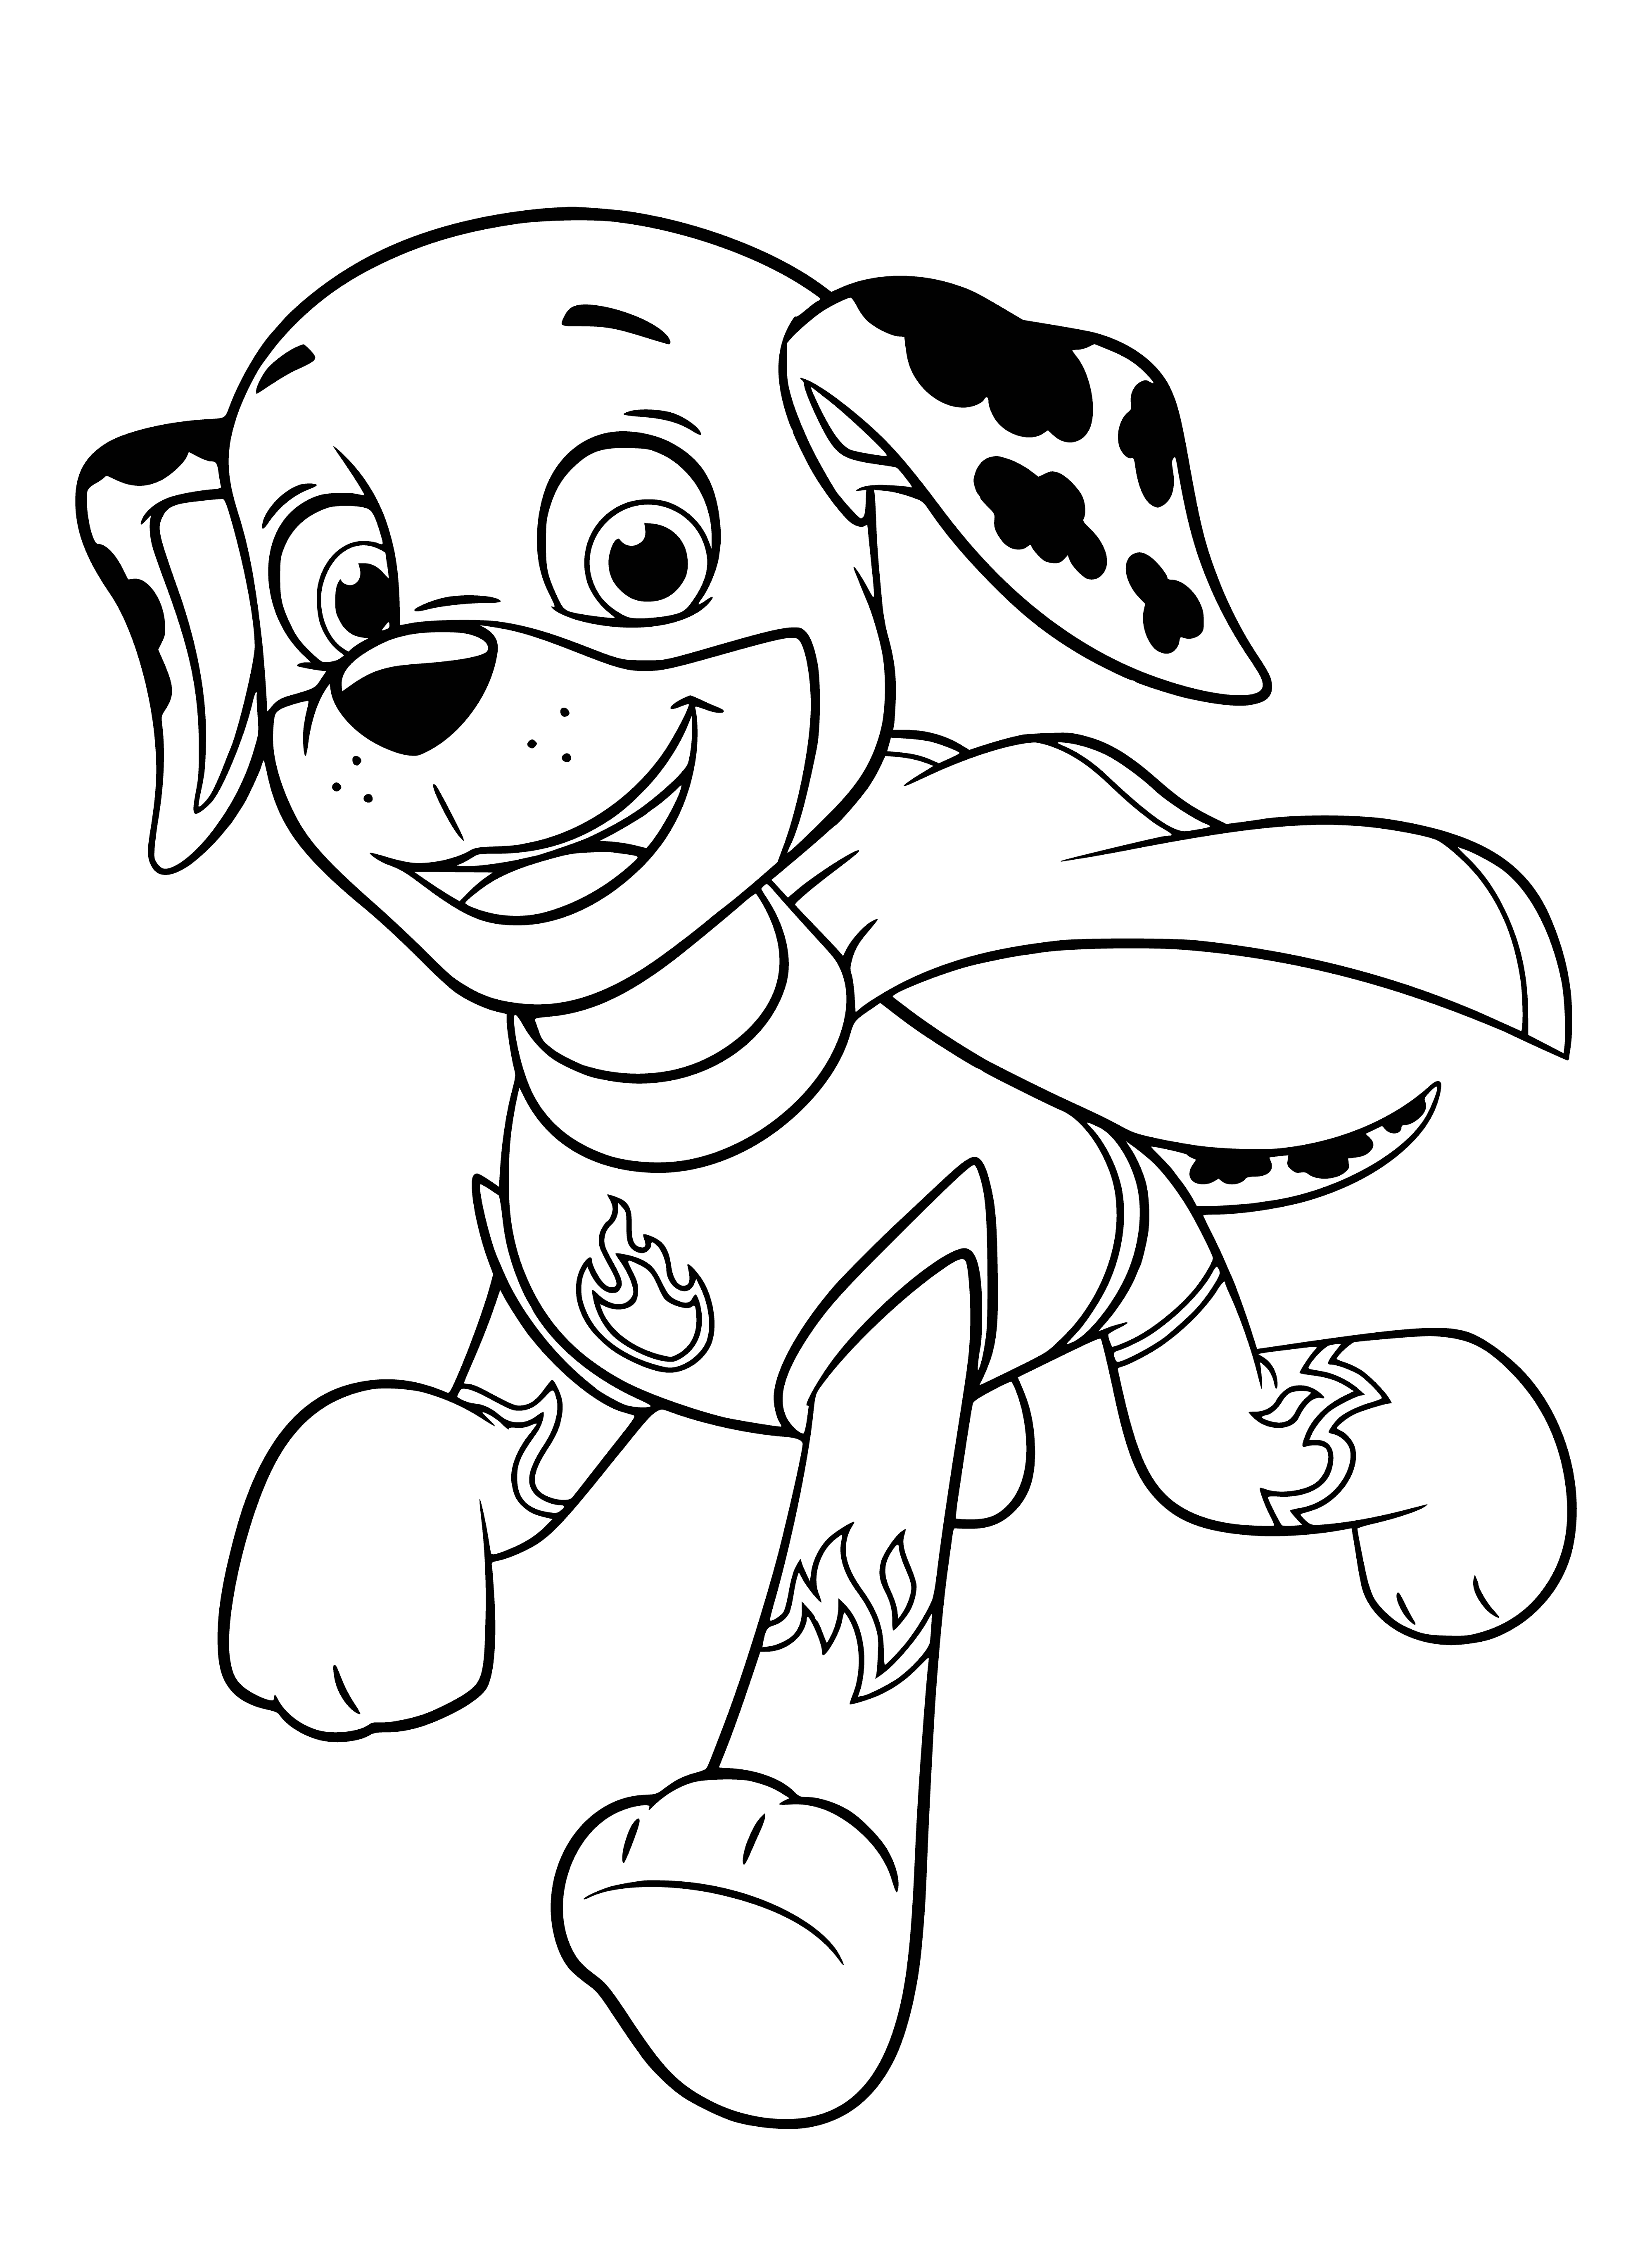 coloring page: A Dalmatian sporting a red cap and striped scarf stands next to a red fire truck. #DalmatianLove